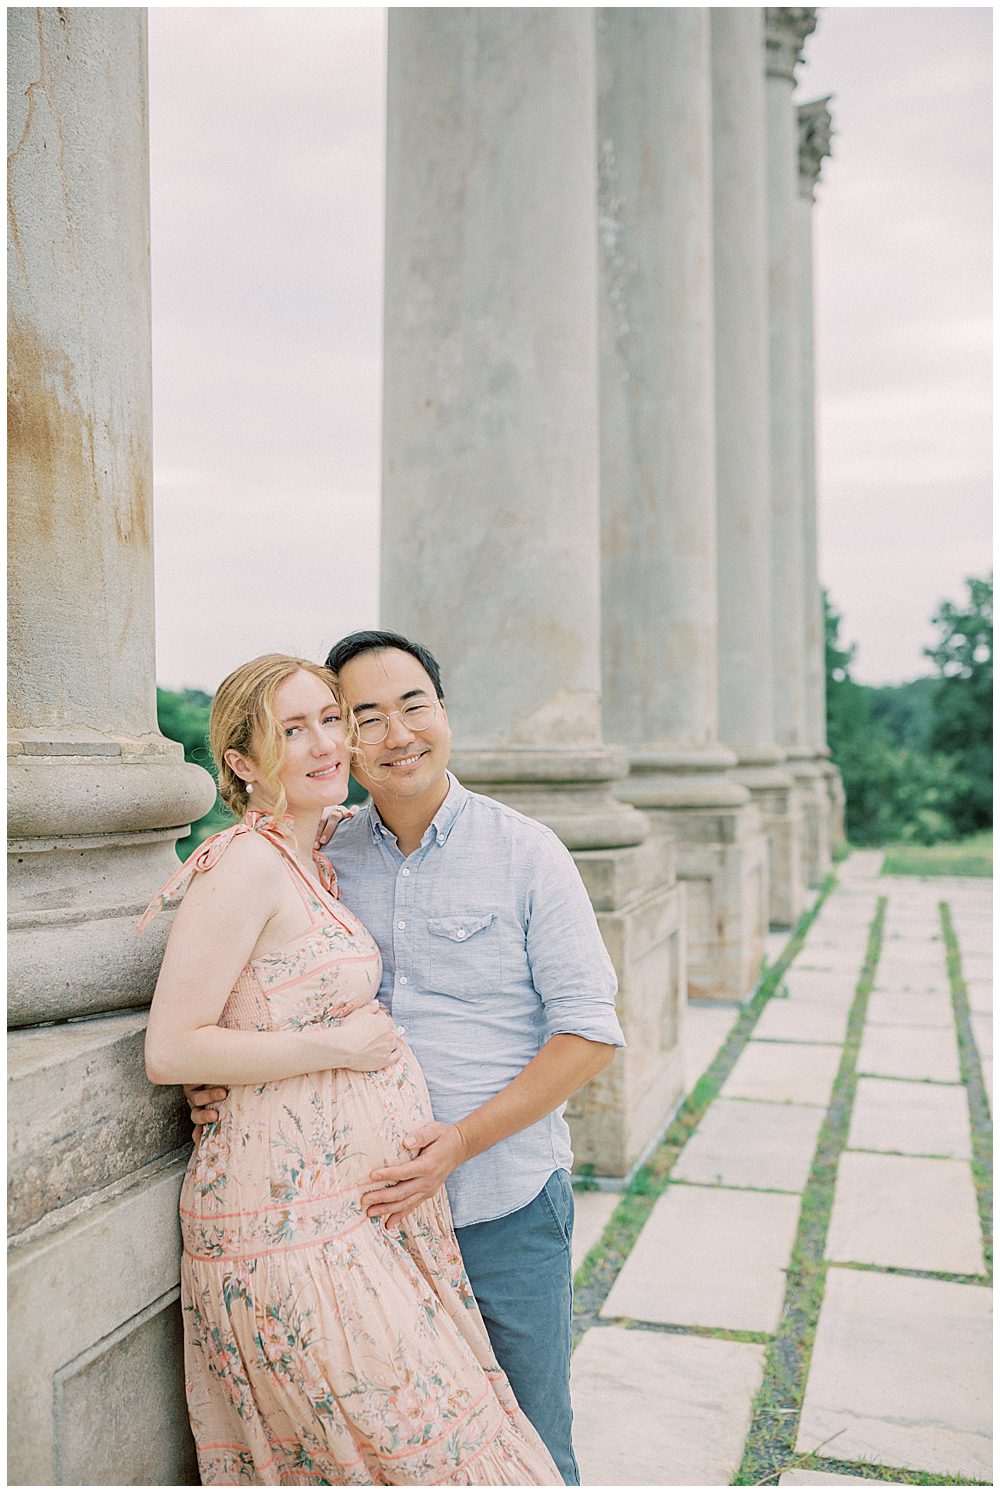 Expecting parents lean against a column at the National Arboretum and smile during their maternity session.